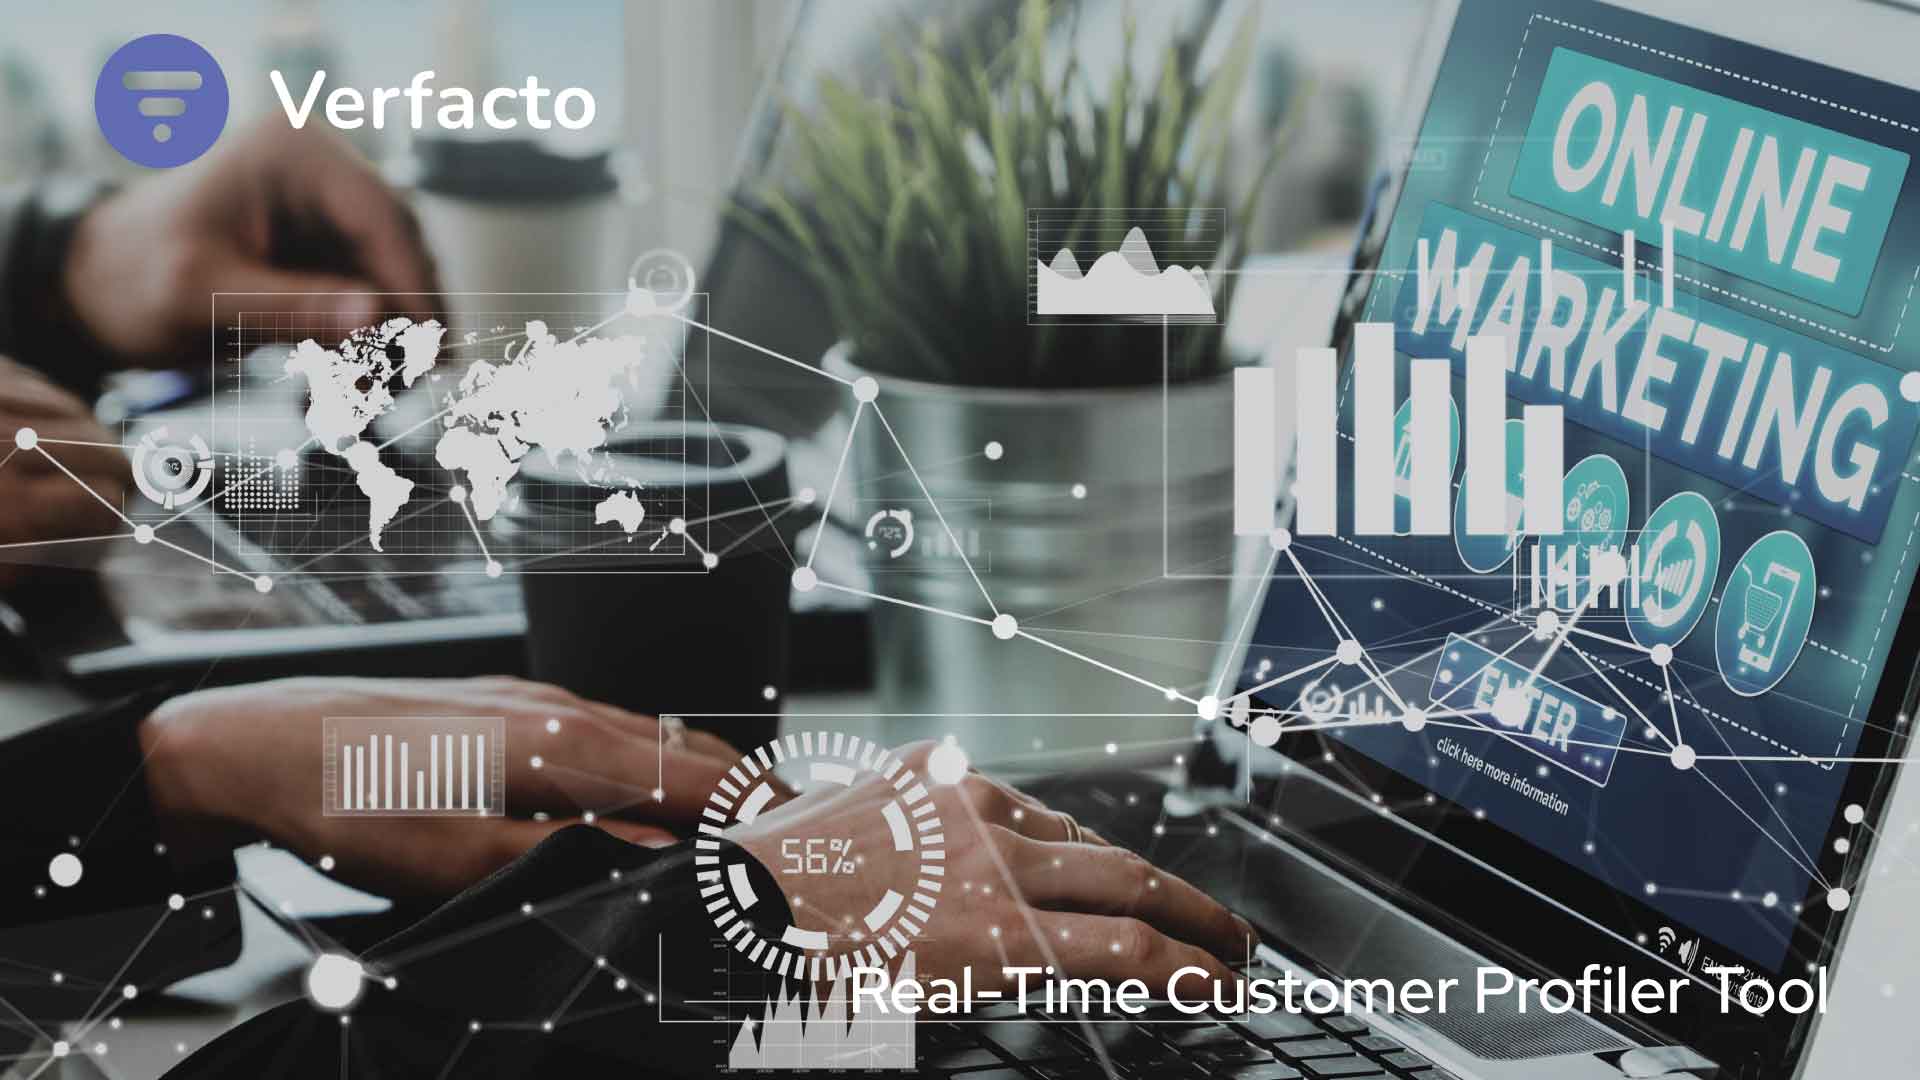 Verfacto Introduce Real-Time Customer Profiler Tool To Improve Your Data-Driven Marketing Strategy, Increase Sales, and Get More Customer Insights for Online Stores